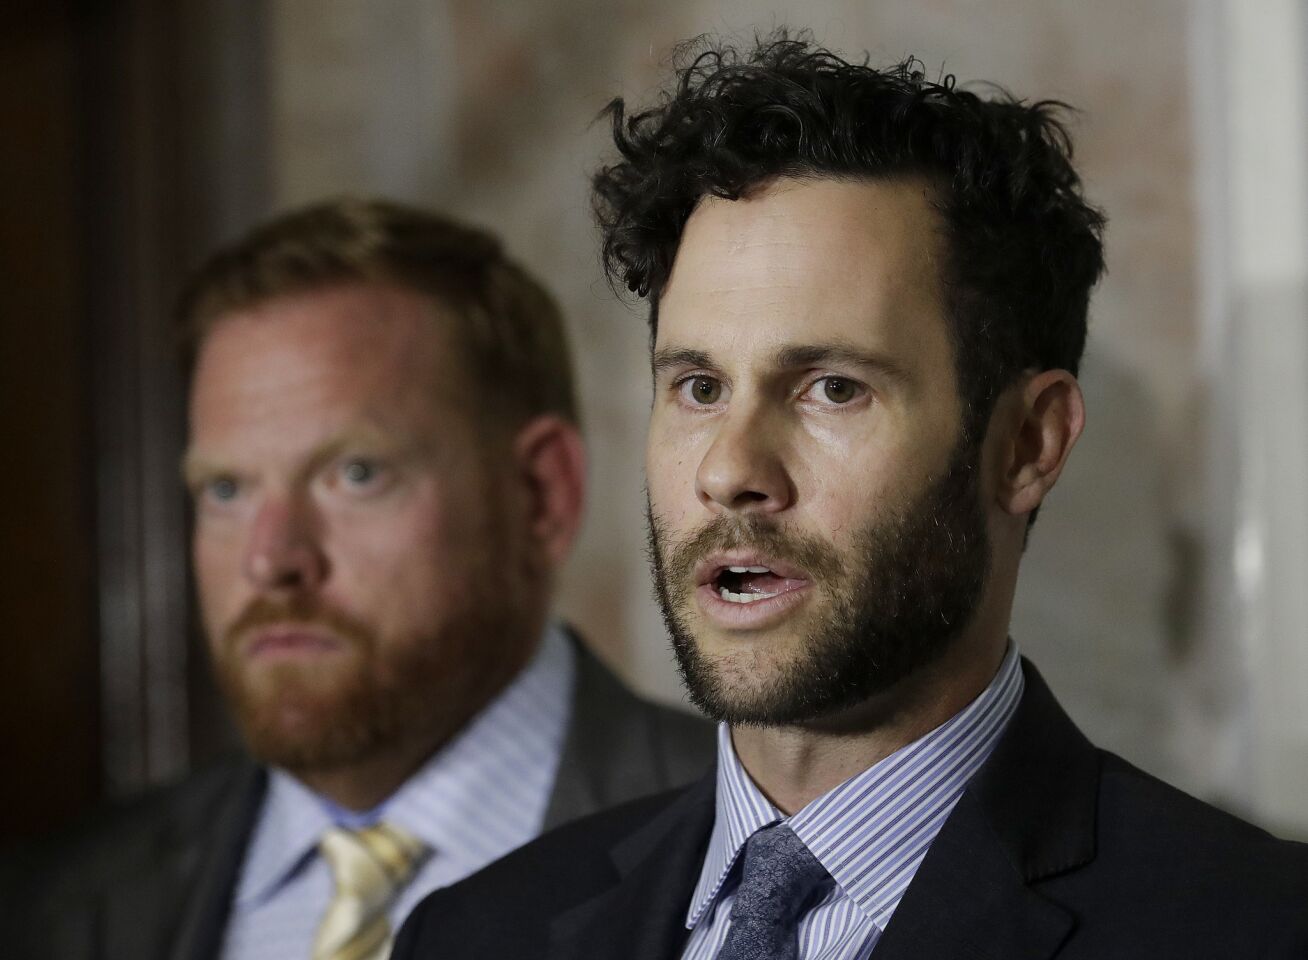 Attorneys Tyler Smith, right, and Curtis Briggs, who represent Max Harris, speak to reporters at a courthouse in Oakland.